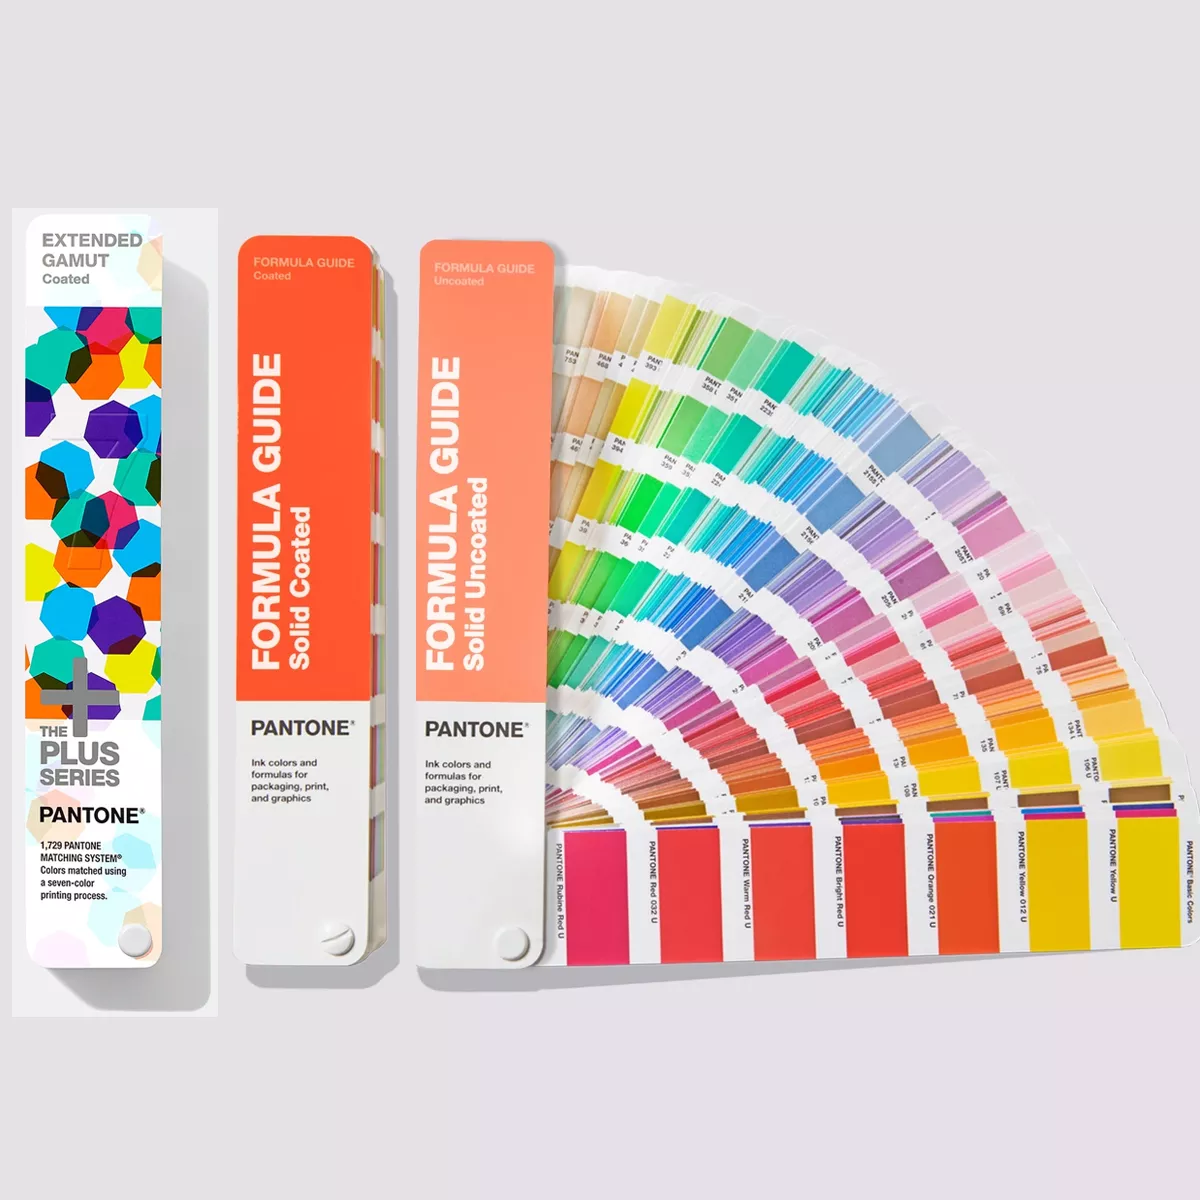 PANTONE Plus Extended Gamut Guide + Formula Guide Coated & Uncoated 1